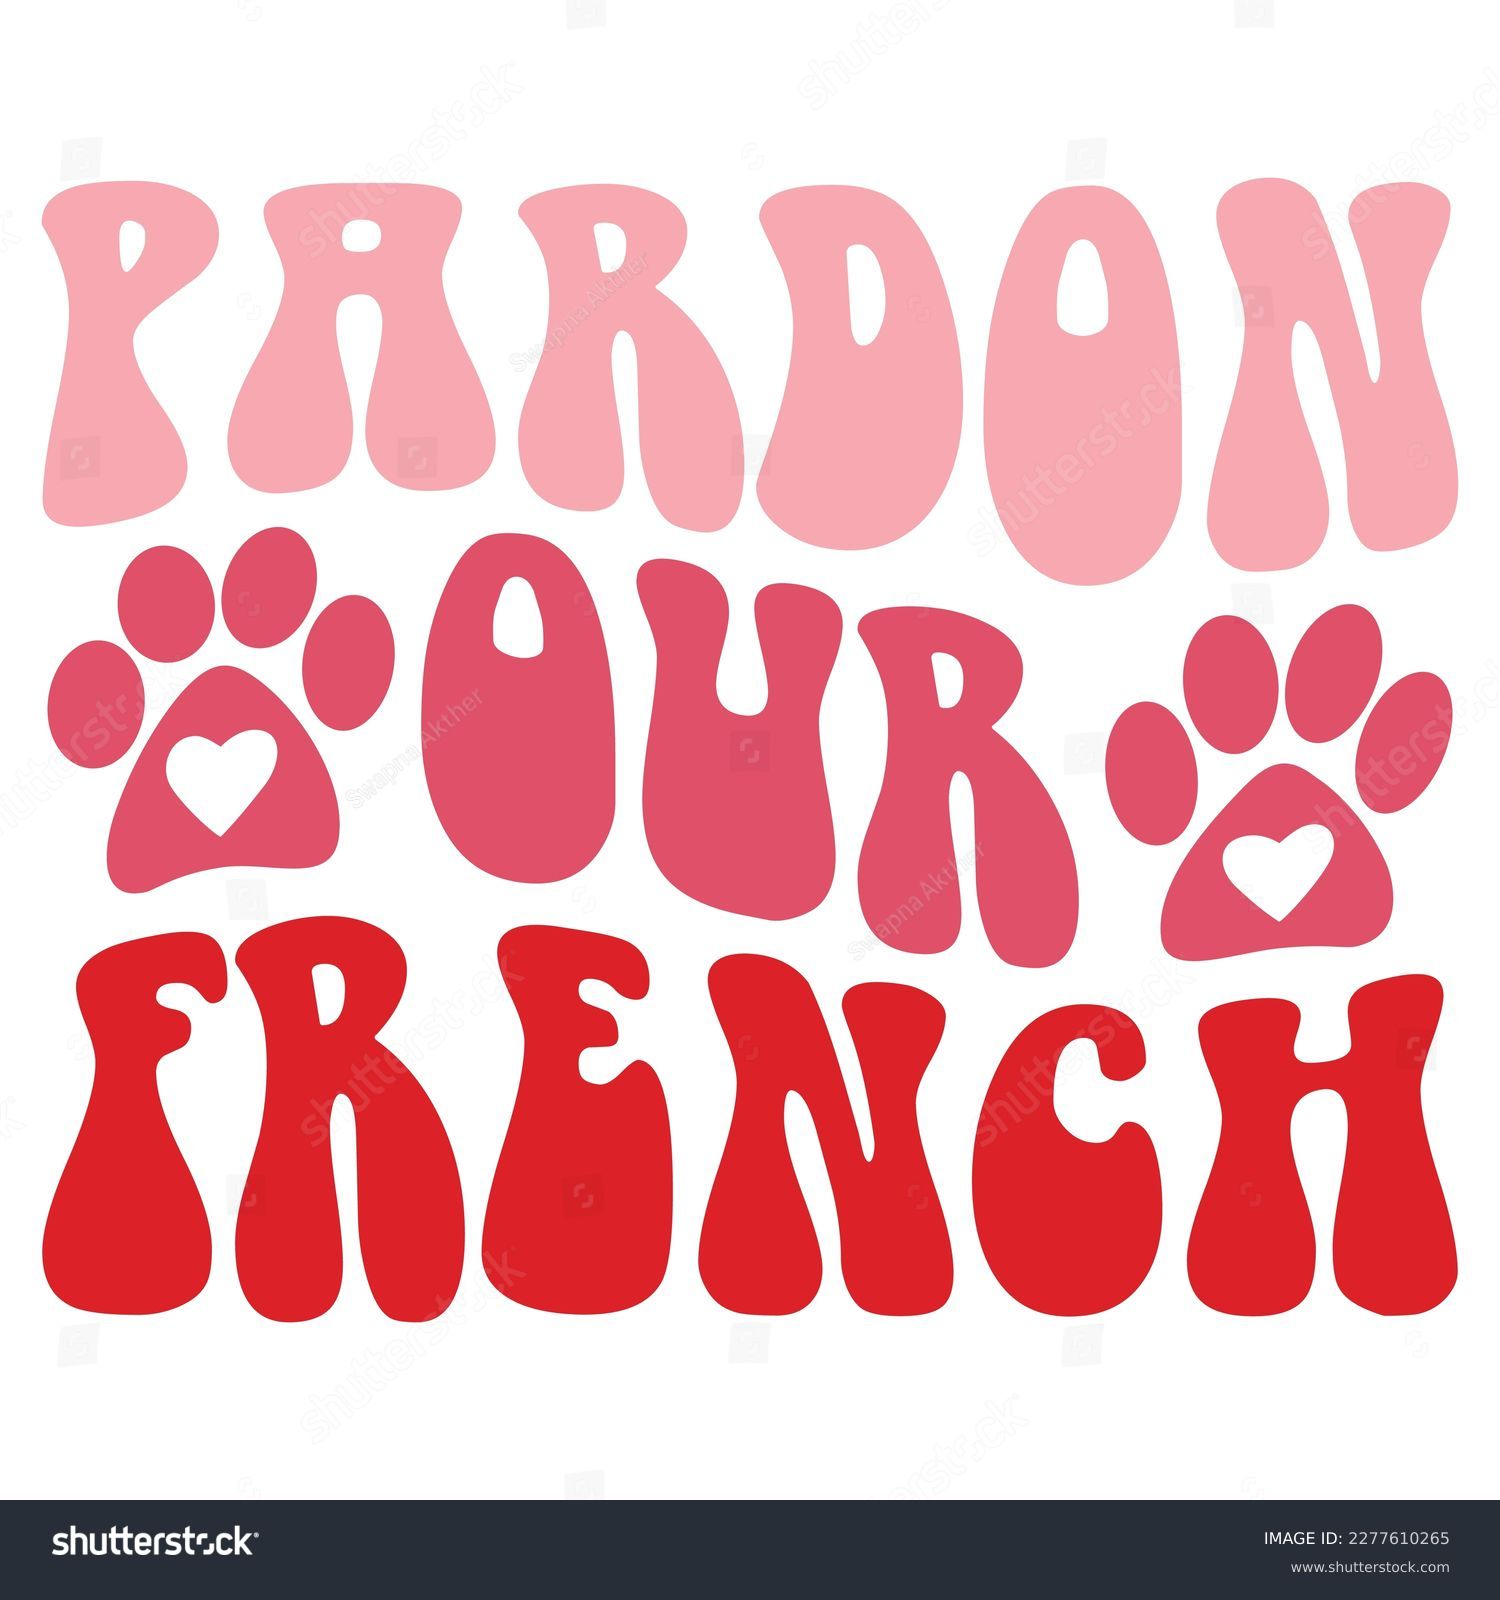 SVG of Pardon Our French - Boho Retro Style Dog T-shirt And SVG Design. Dog SVG Quotes T shirt Design, Vector EPS Editable Files, Can You Download This File. svg